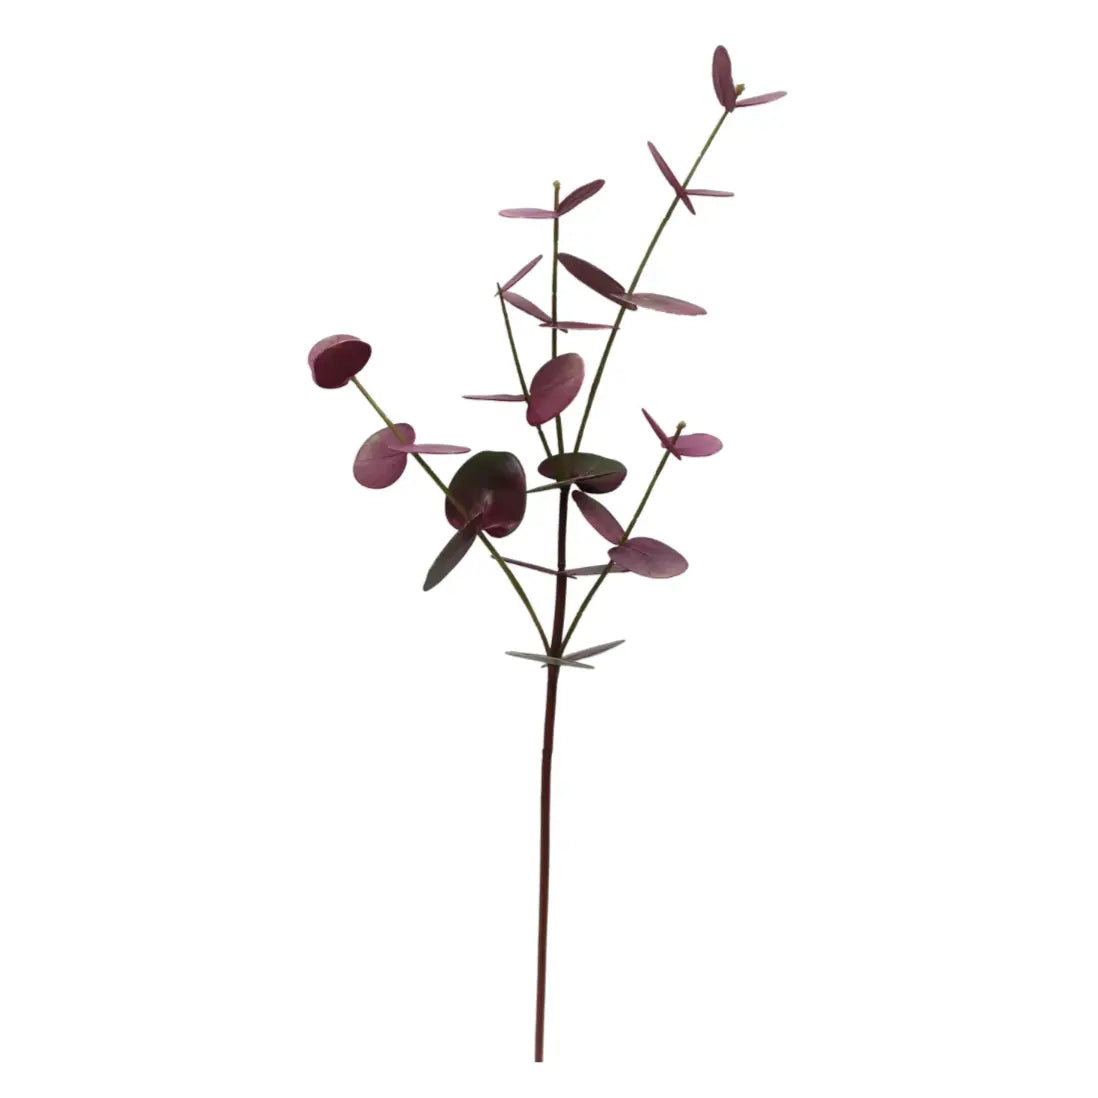 Home Smith Eucalyptus Stems in Deep Burgundy Winward Stems, Blooms & Branches